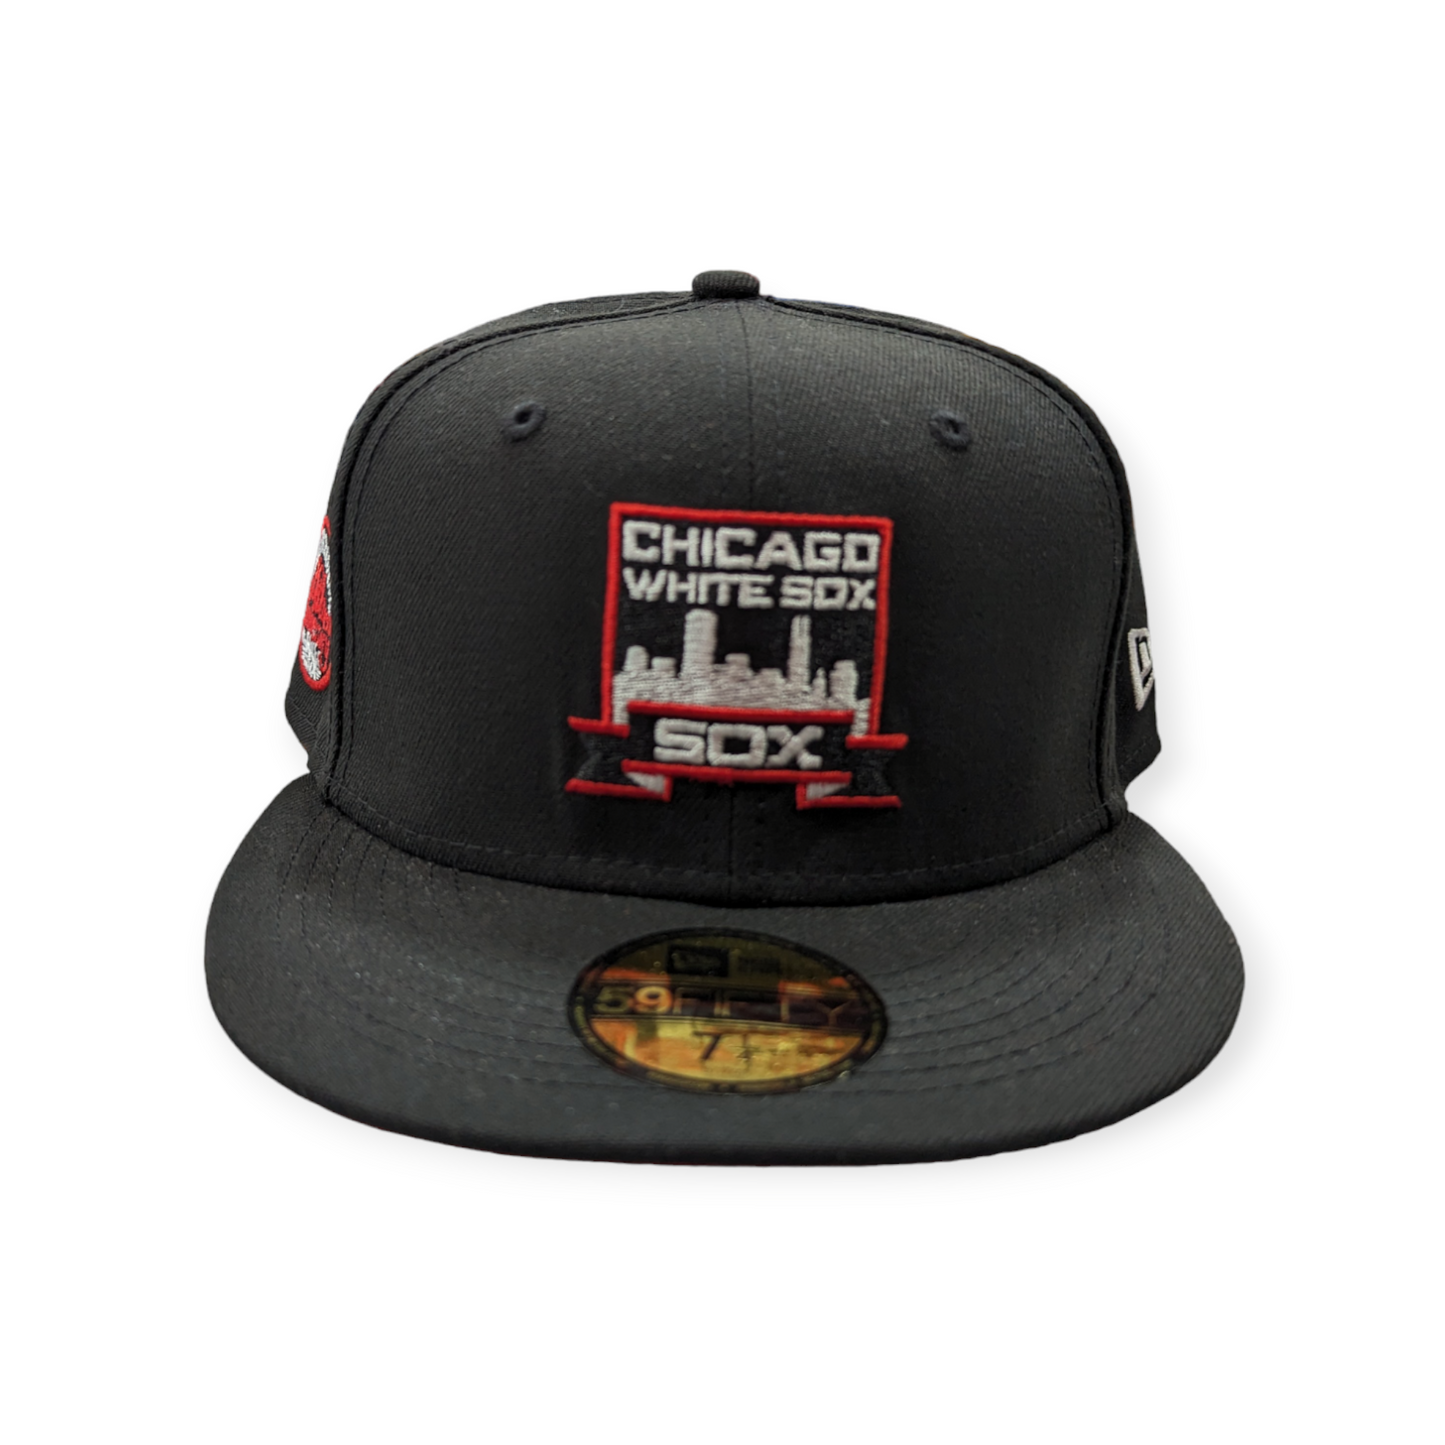 Chicago White Sox New Era Black Skyline Black 59FIFTY Fitted Hat